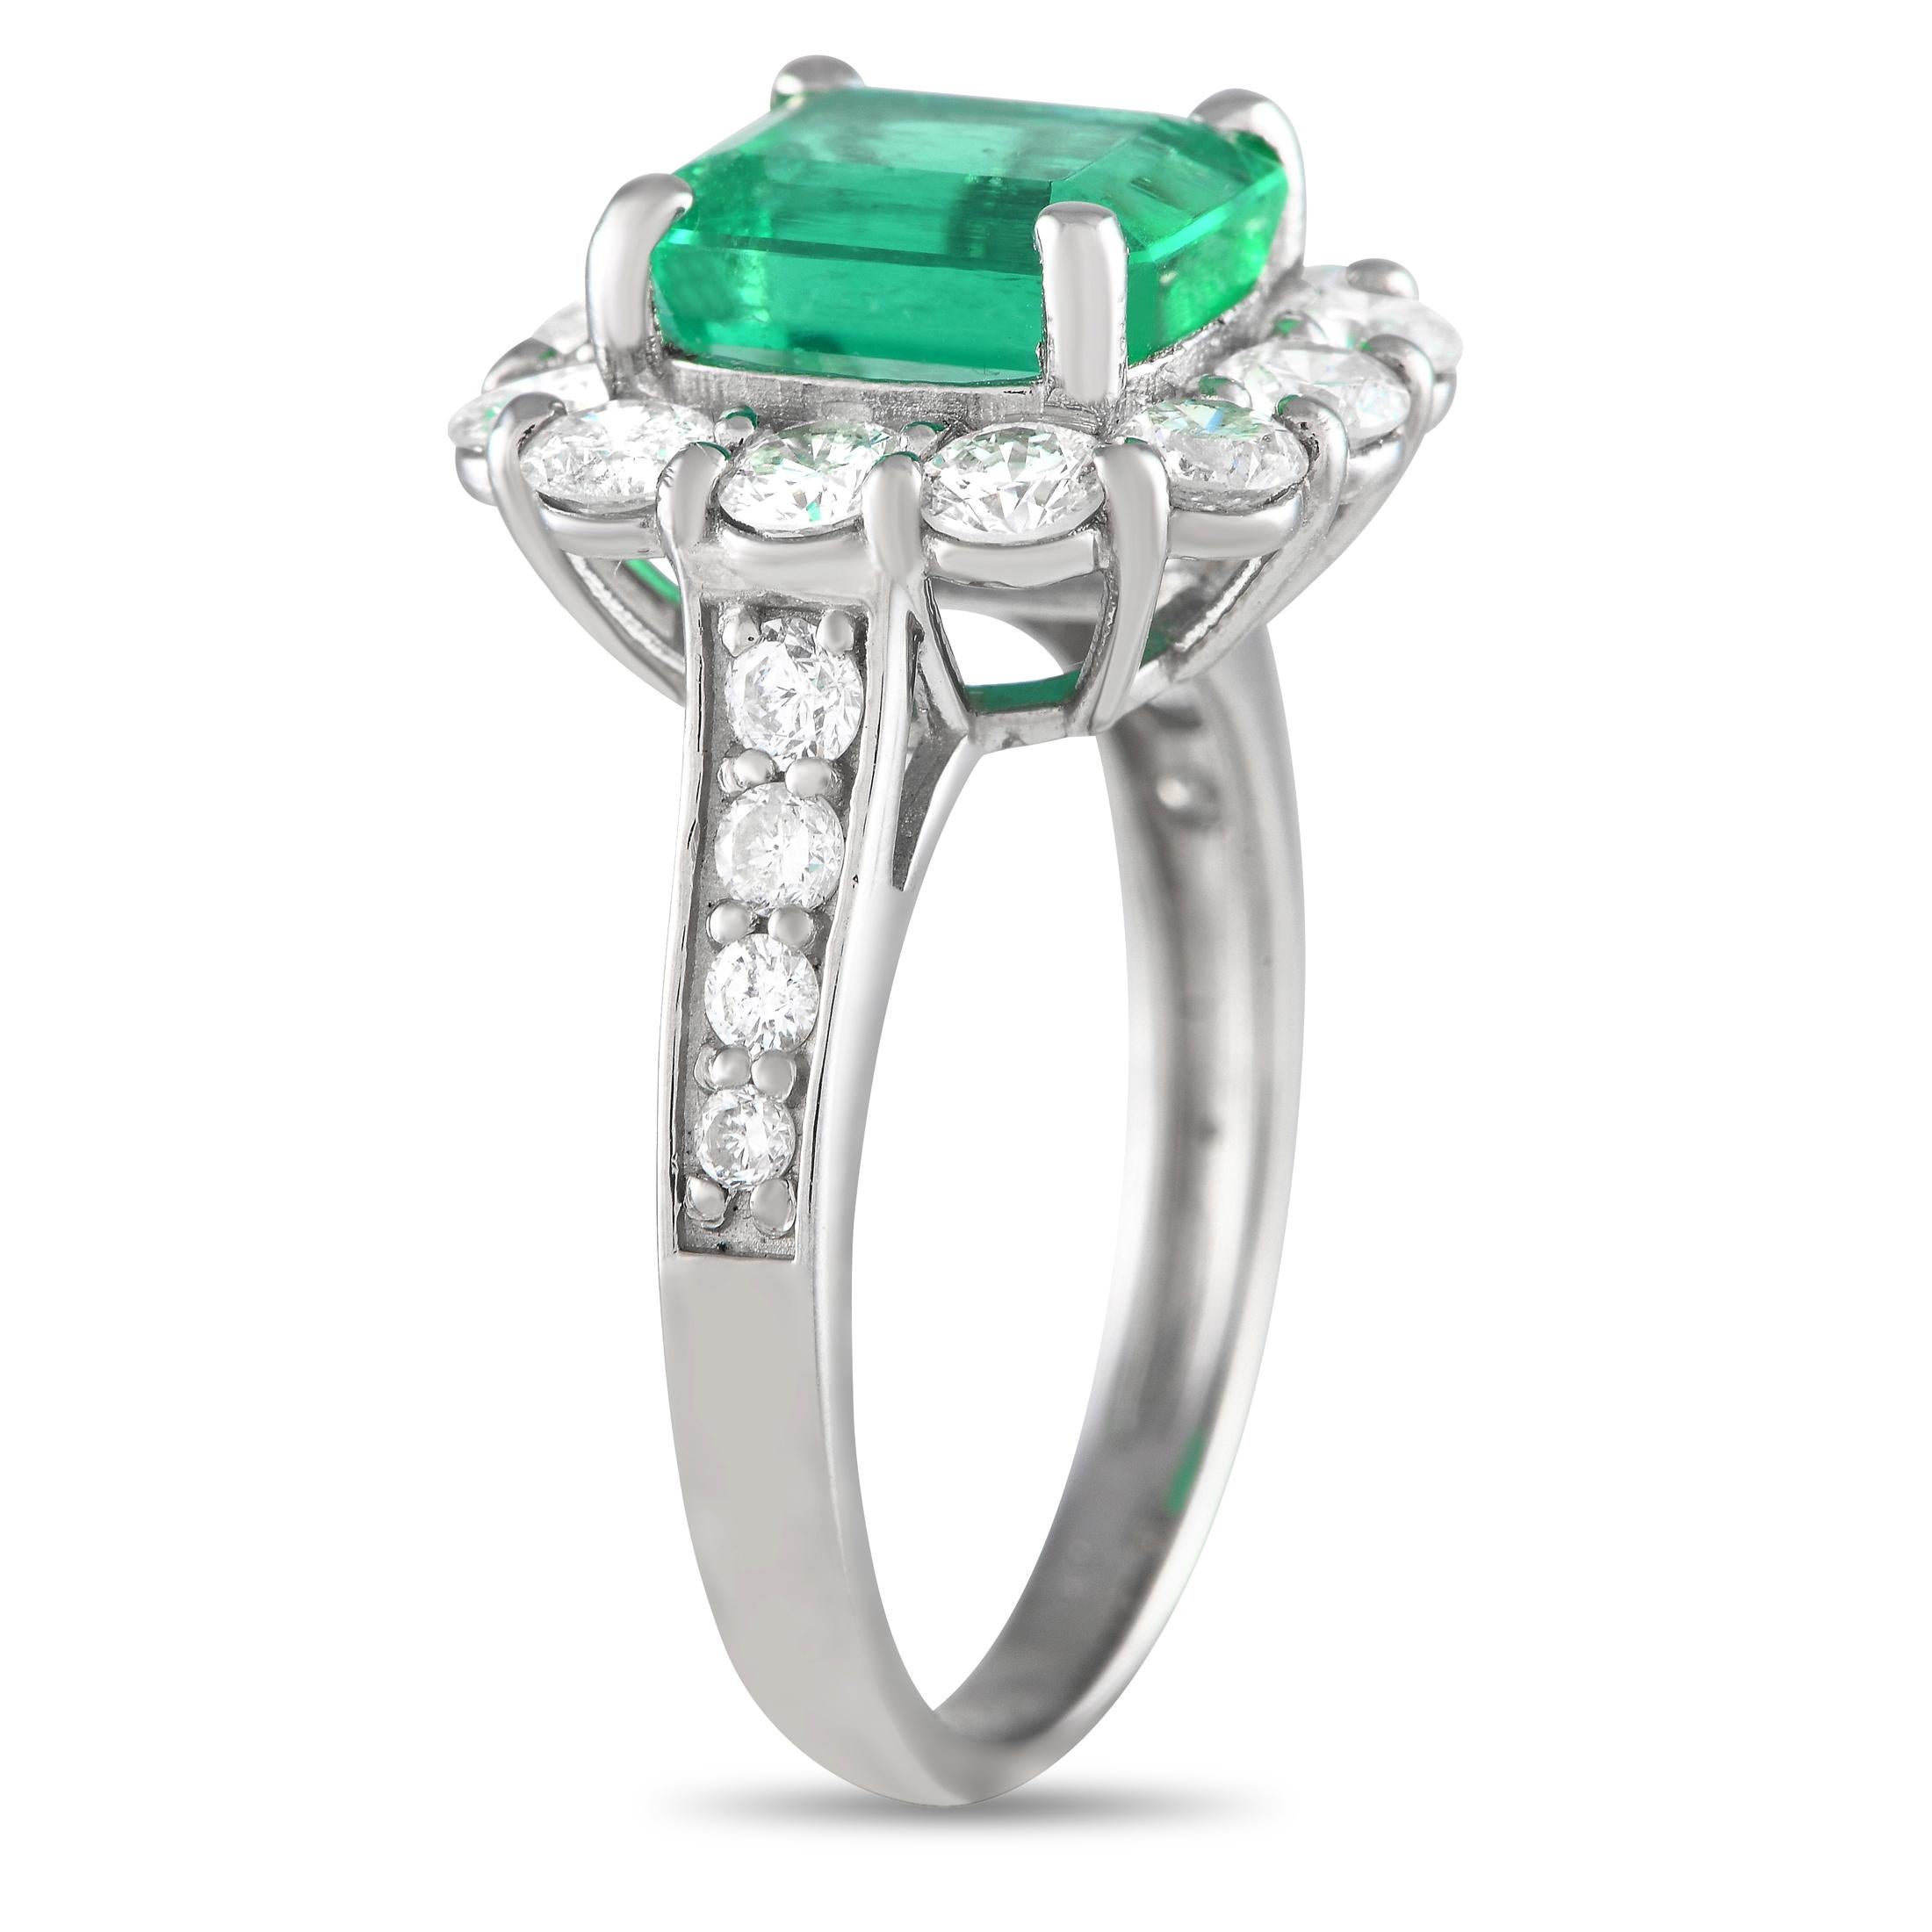 Expect to find yourself marveling at the beauty of this ring. An piece, this sparkler is luxuriously crafted in 950 platinum and decorated with a halo of round diamonds surrounding a gorgeous 2.44-carat emerald gemstone. Round diamonds that taper in